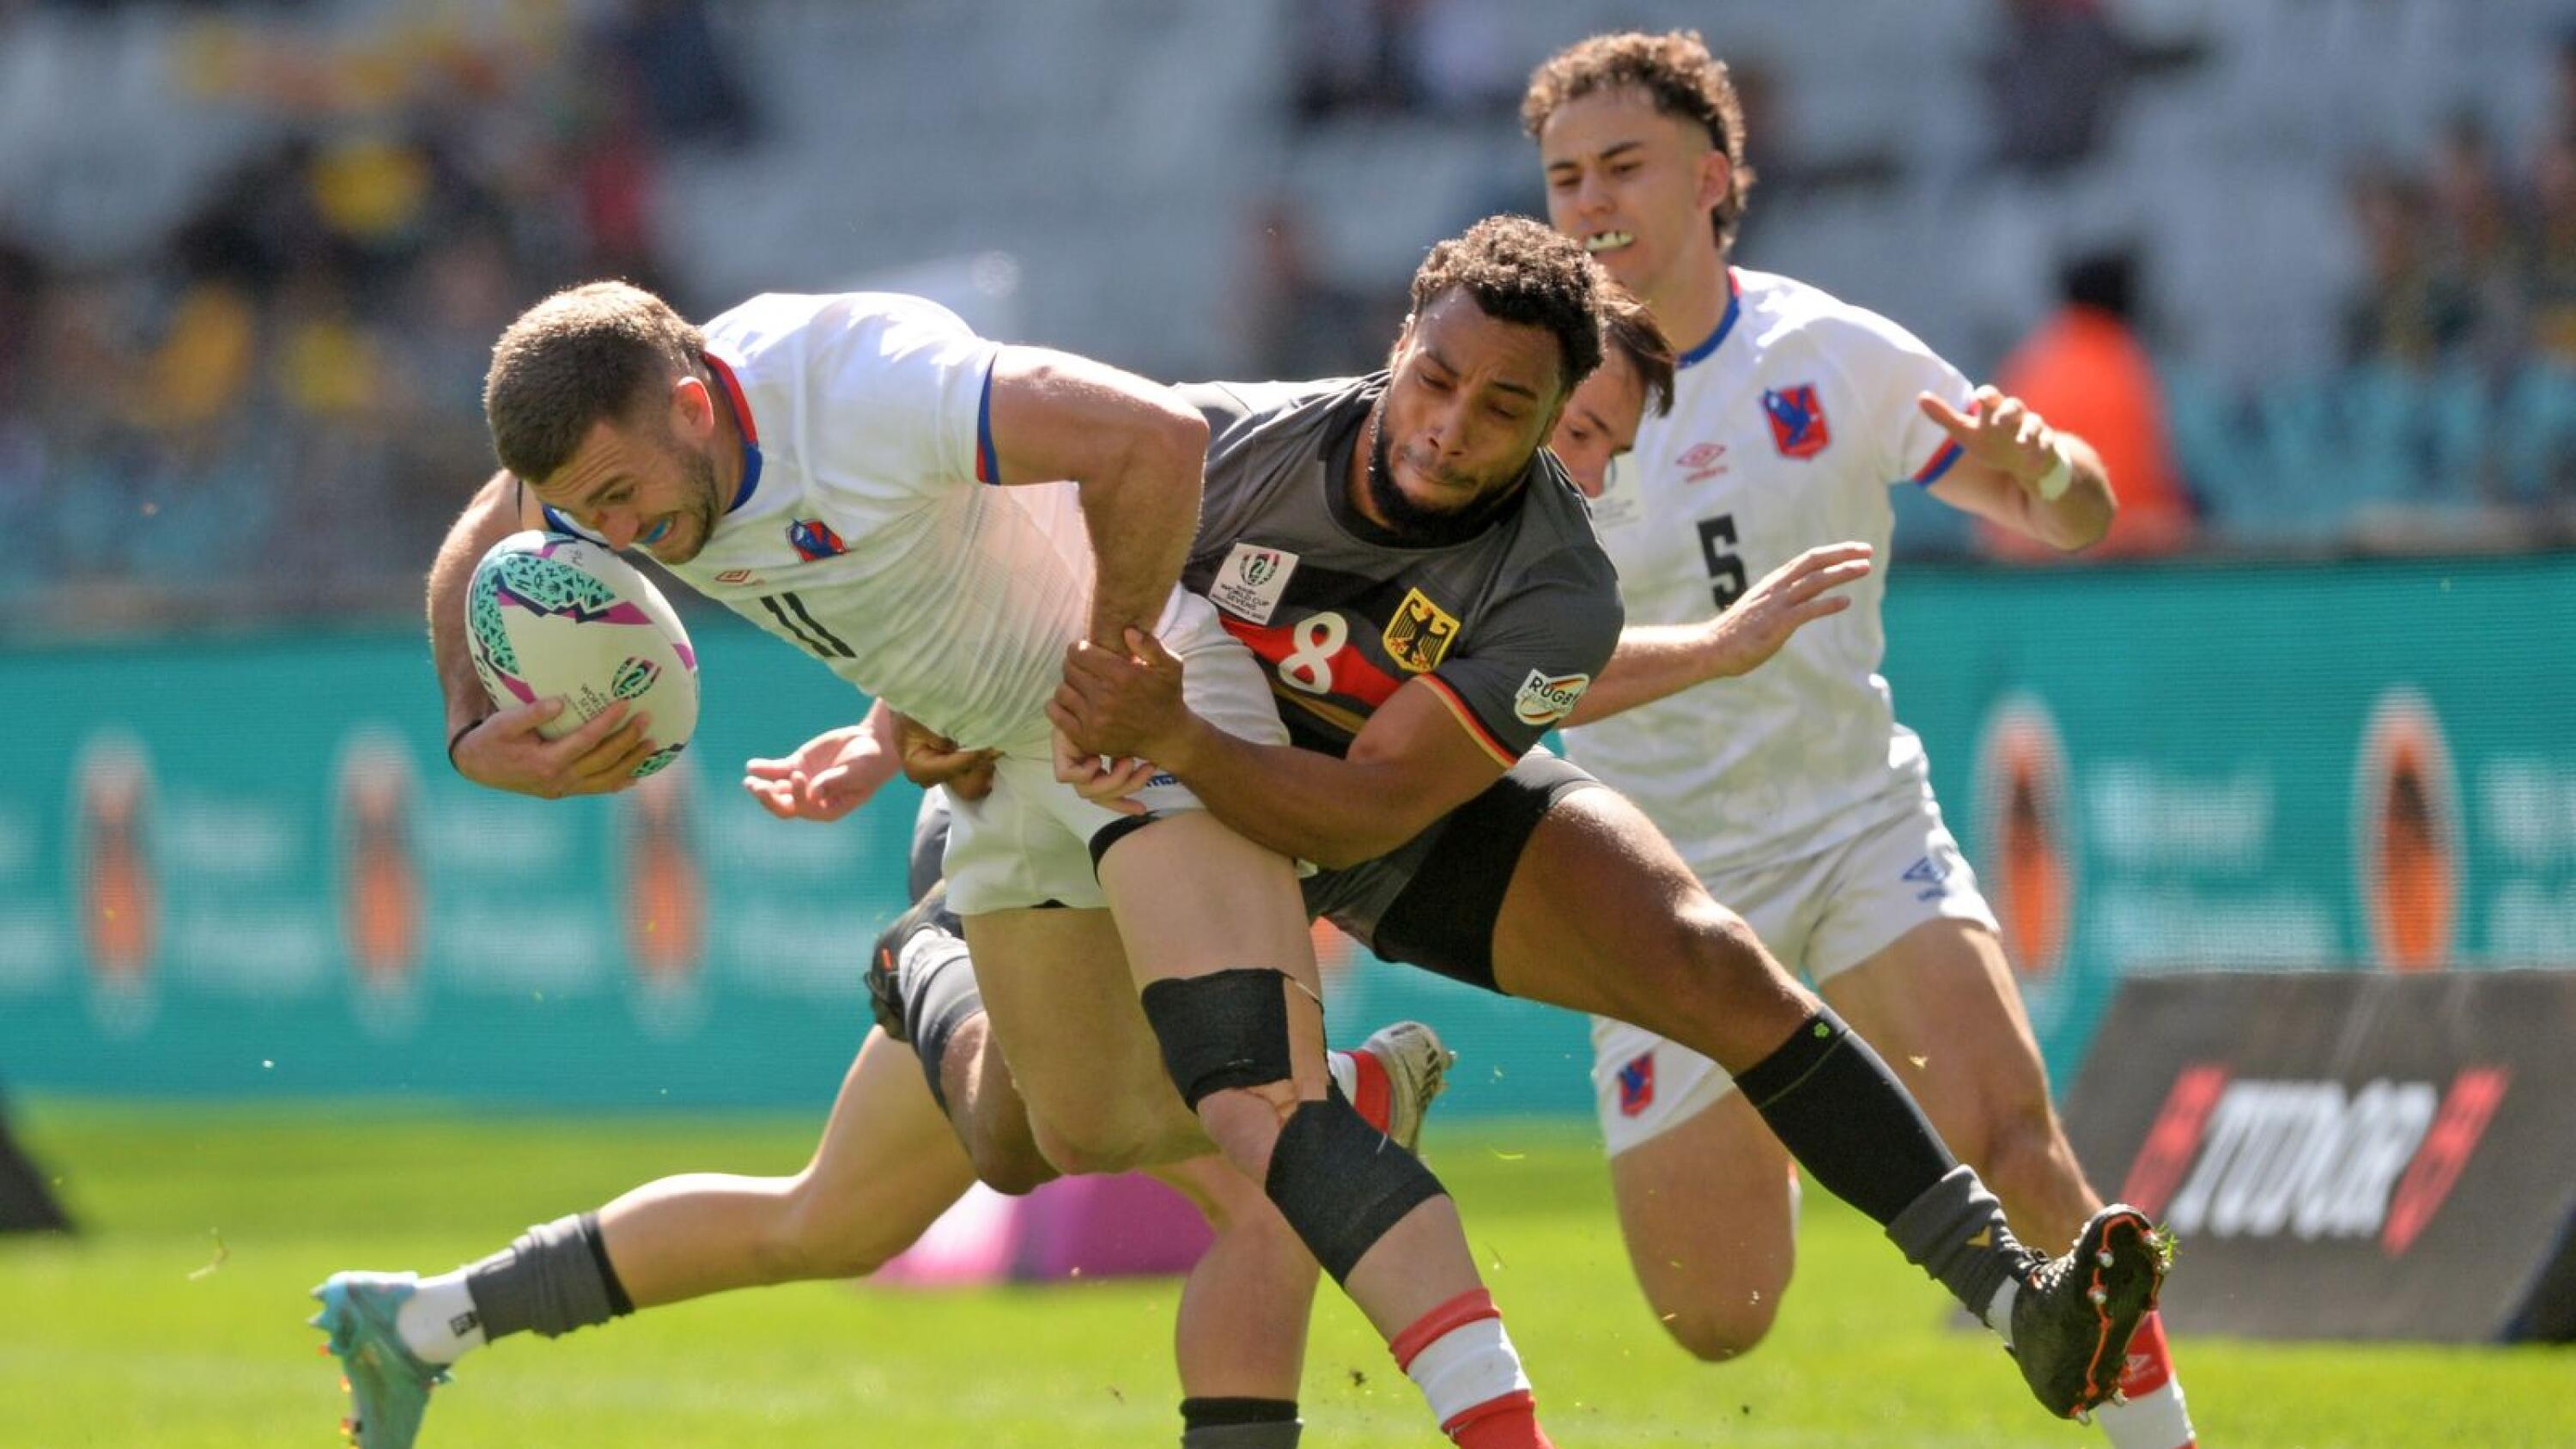 Julio Blanc of Chile is tackled by Ben Ellermann of Germany during day one of the South Africa Rugby World Cup Sevens tournament at Cape Town Stadium.